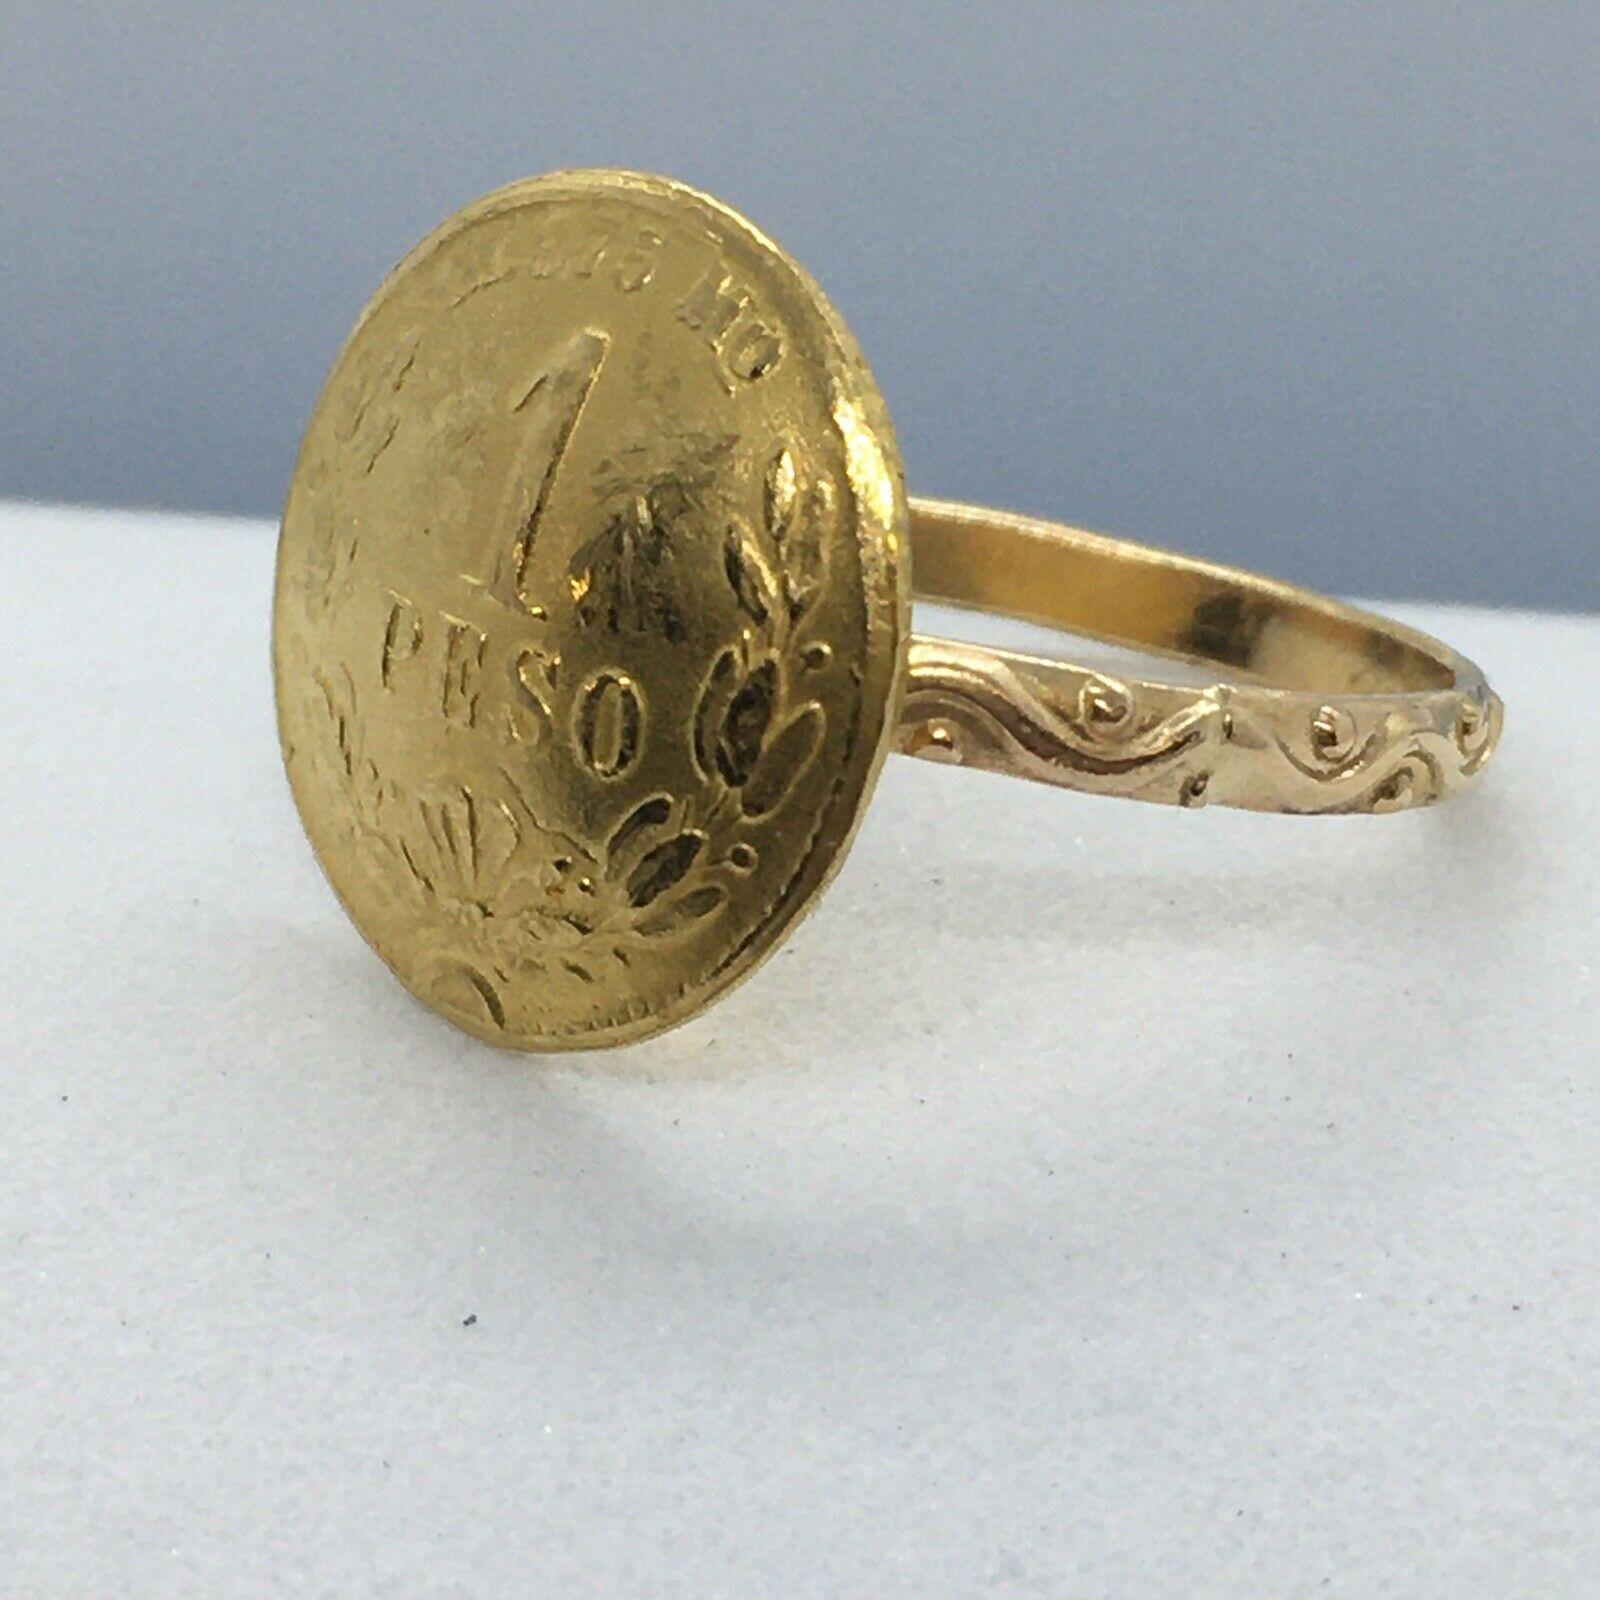 Coin Ring Tested 22K gold 14k Yellow Gold Band Vintage Carving 


Weighting 2.8
No damage, no evidence of repairs
Finger size 6.5
Coin Ring Tested 22K gold 14k Yellow Gold Band Carving Vintage in very good condition